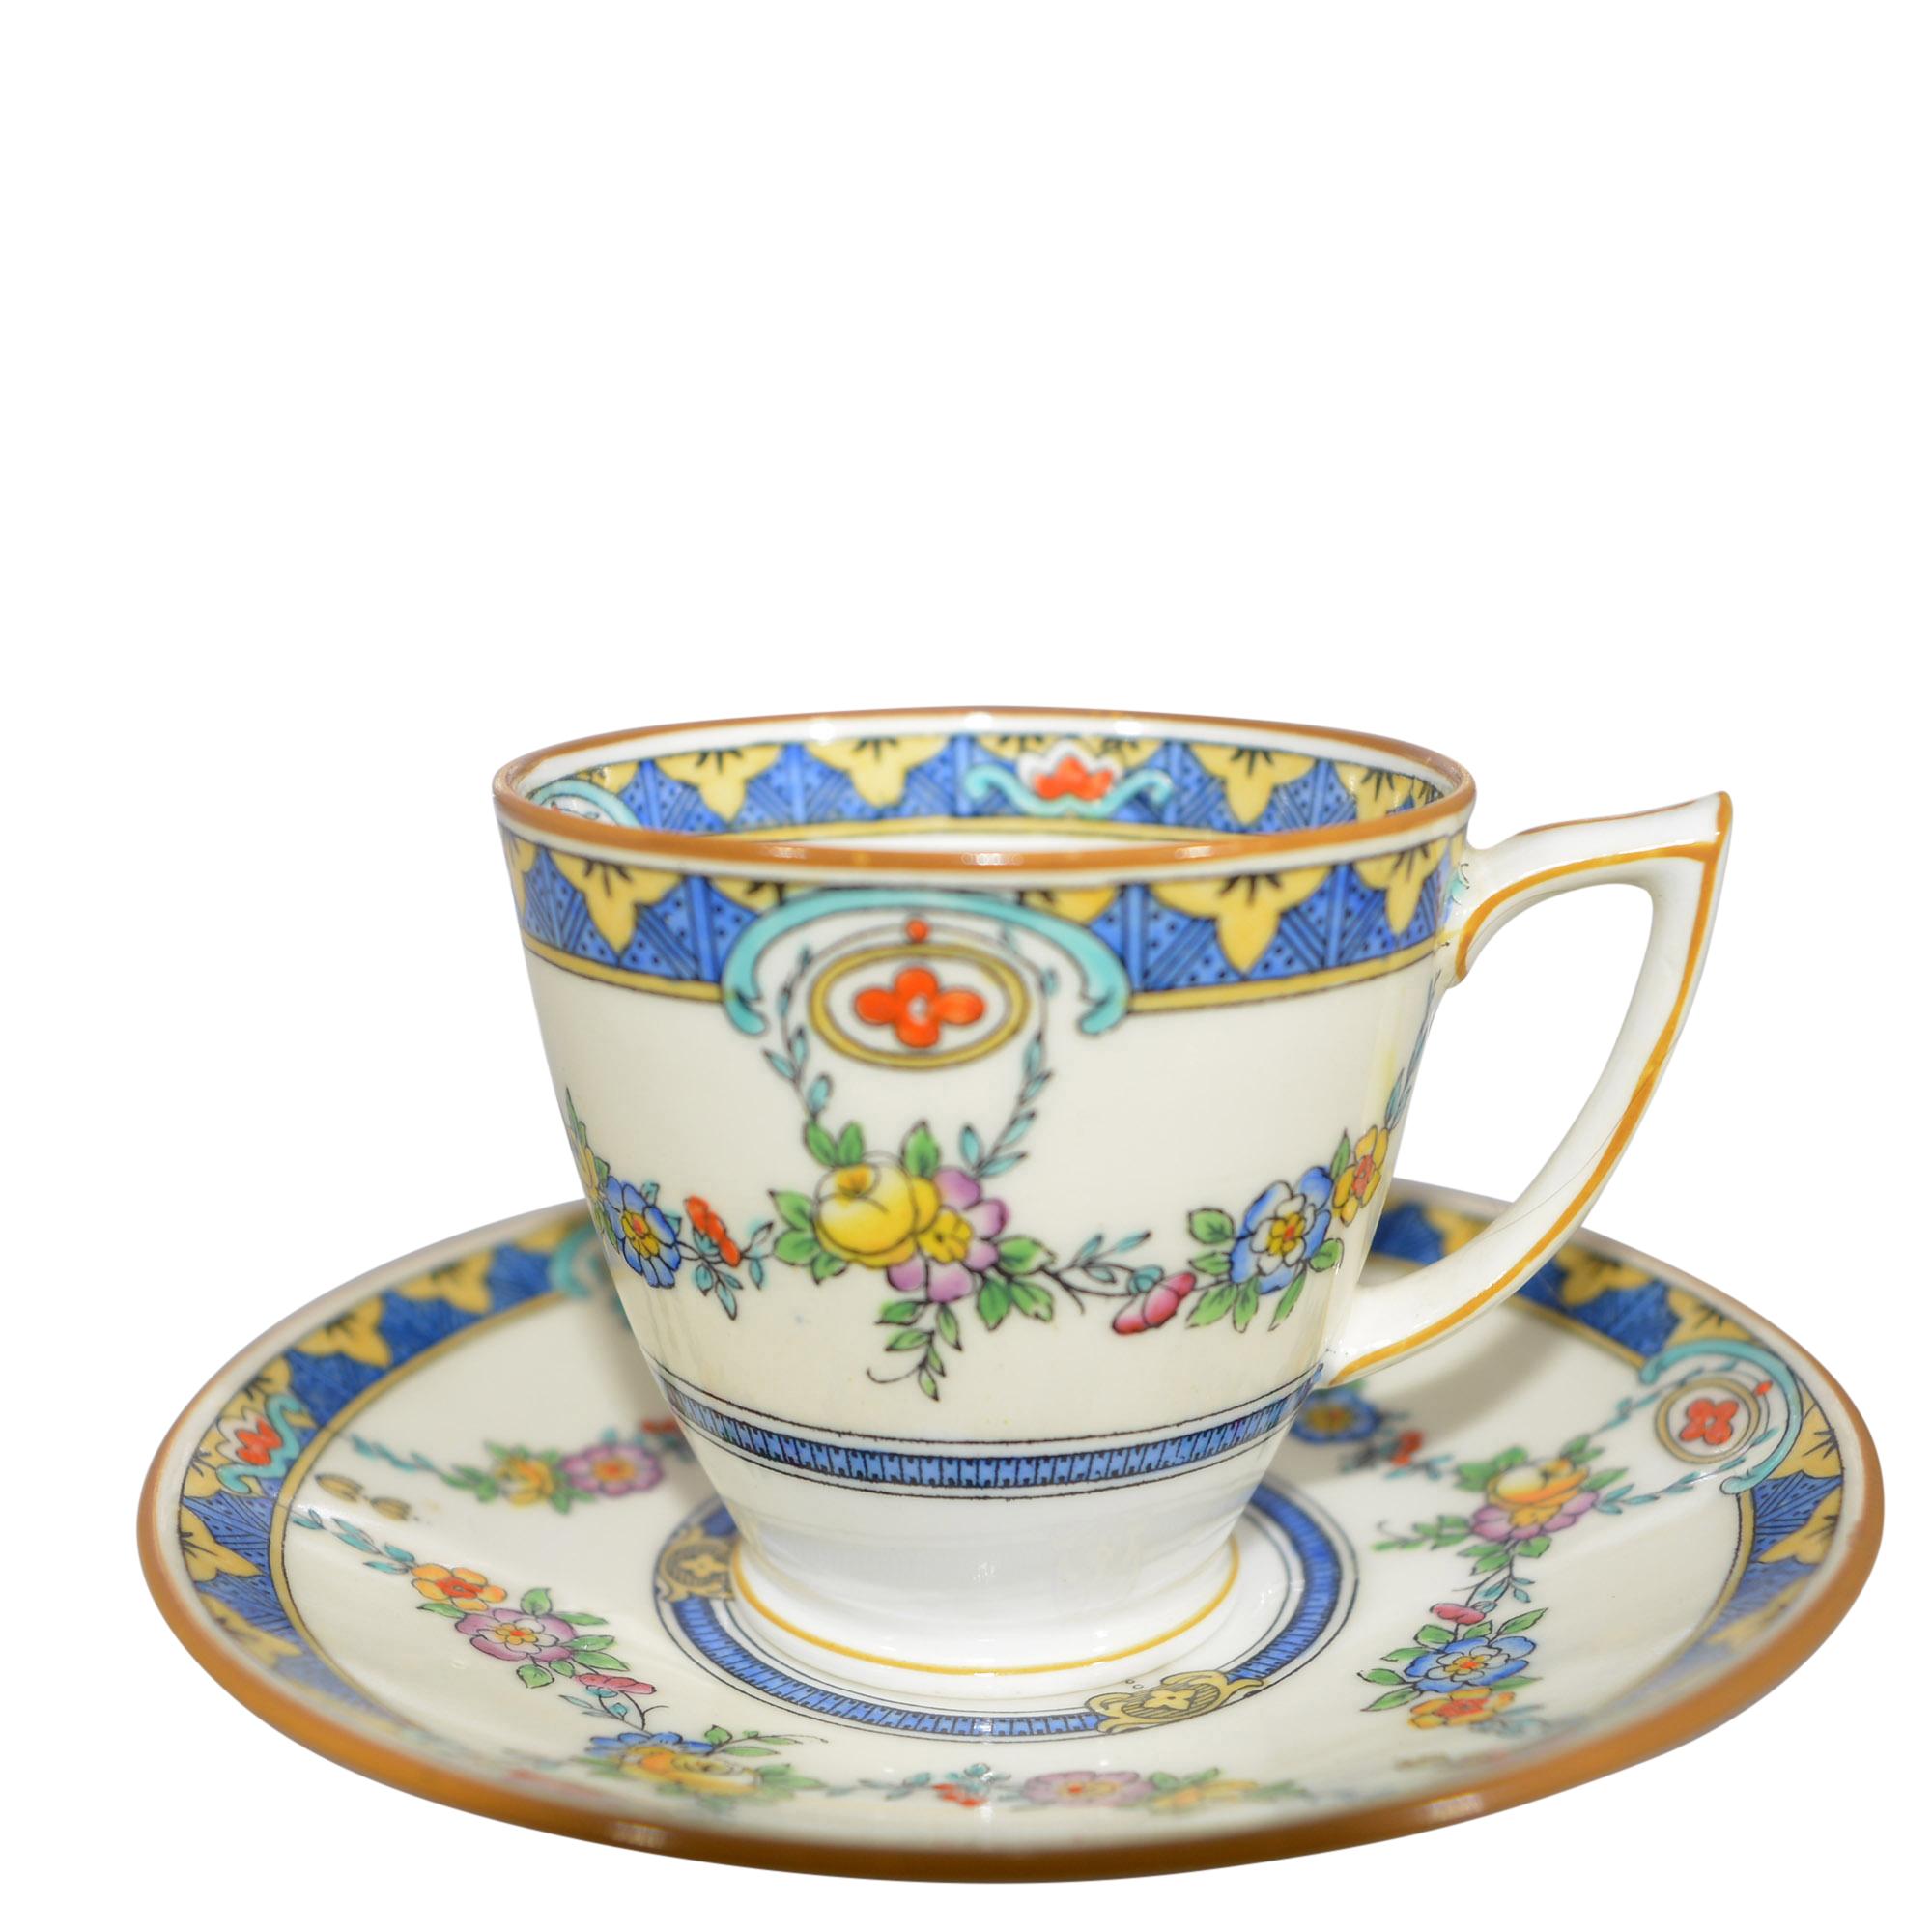 So delicate! This lovely, delicate demitasse cup and saucer set is sure to make any afternoon tea more enjoyable. The floral design contains pinks, yellows, greens and blues. There are 10 underplates and 10 cups in the set.